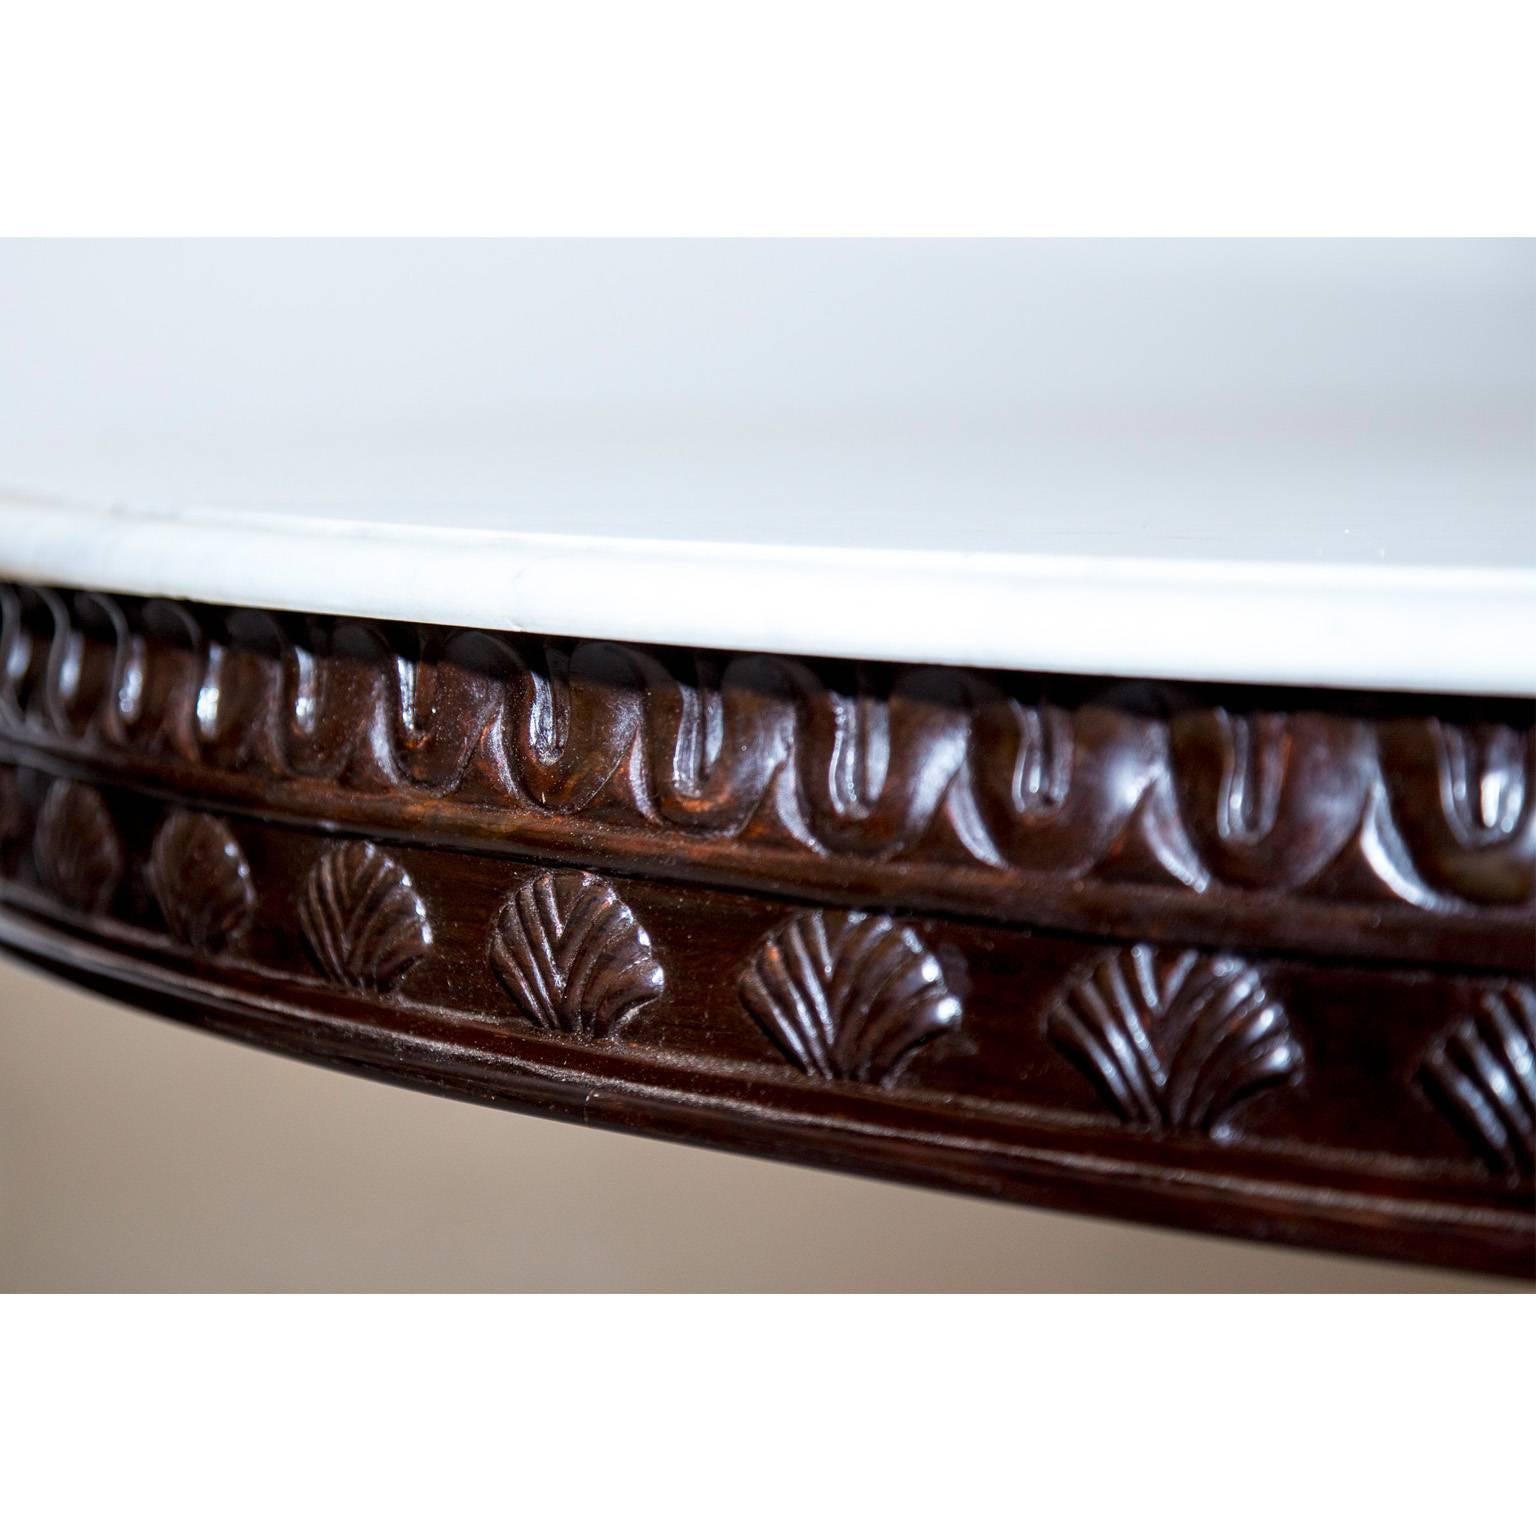 Carved Antique Anglo-Indian or British Colonial Rosewood Dining Table with Marble Top For Sale